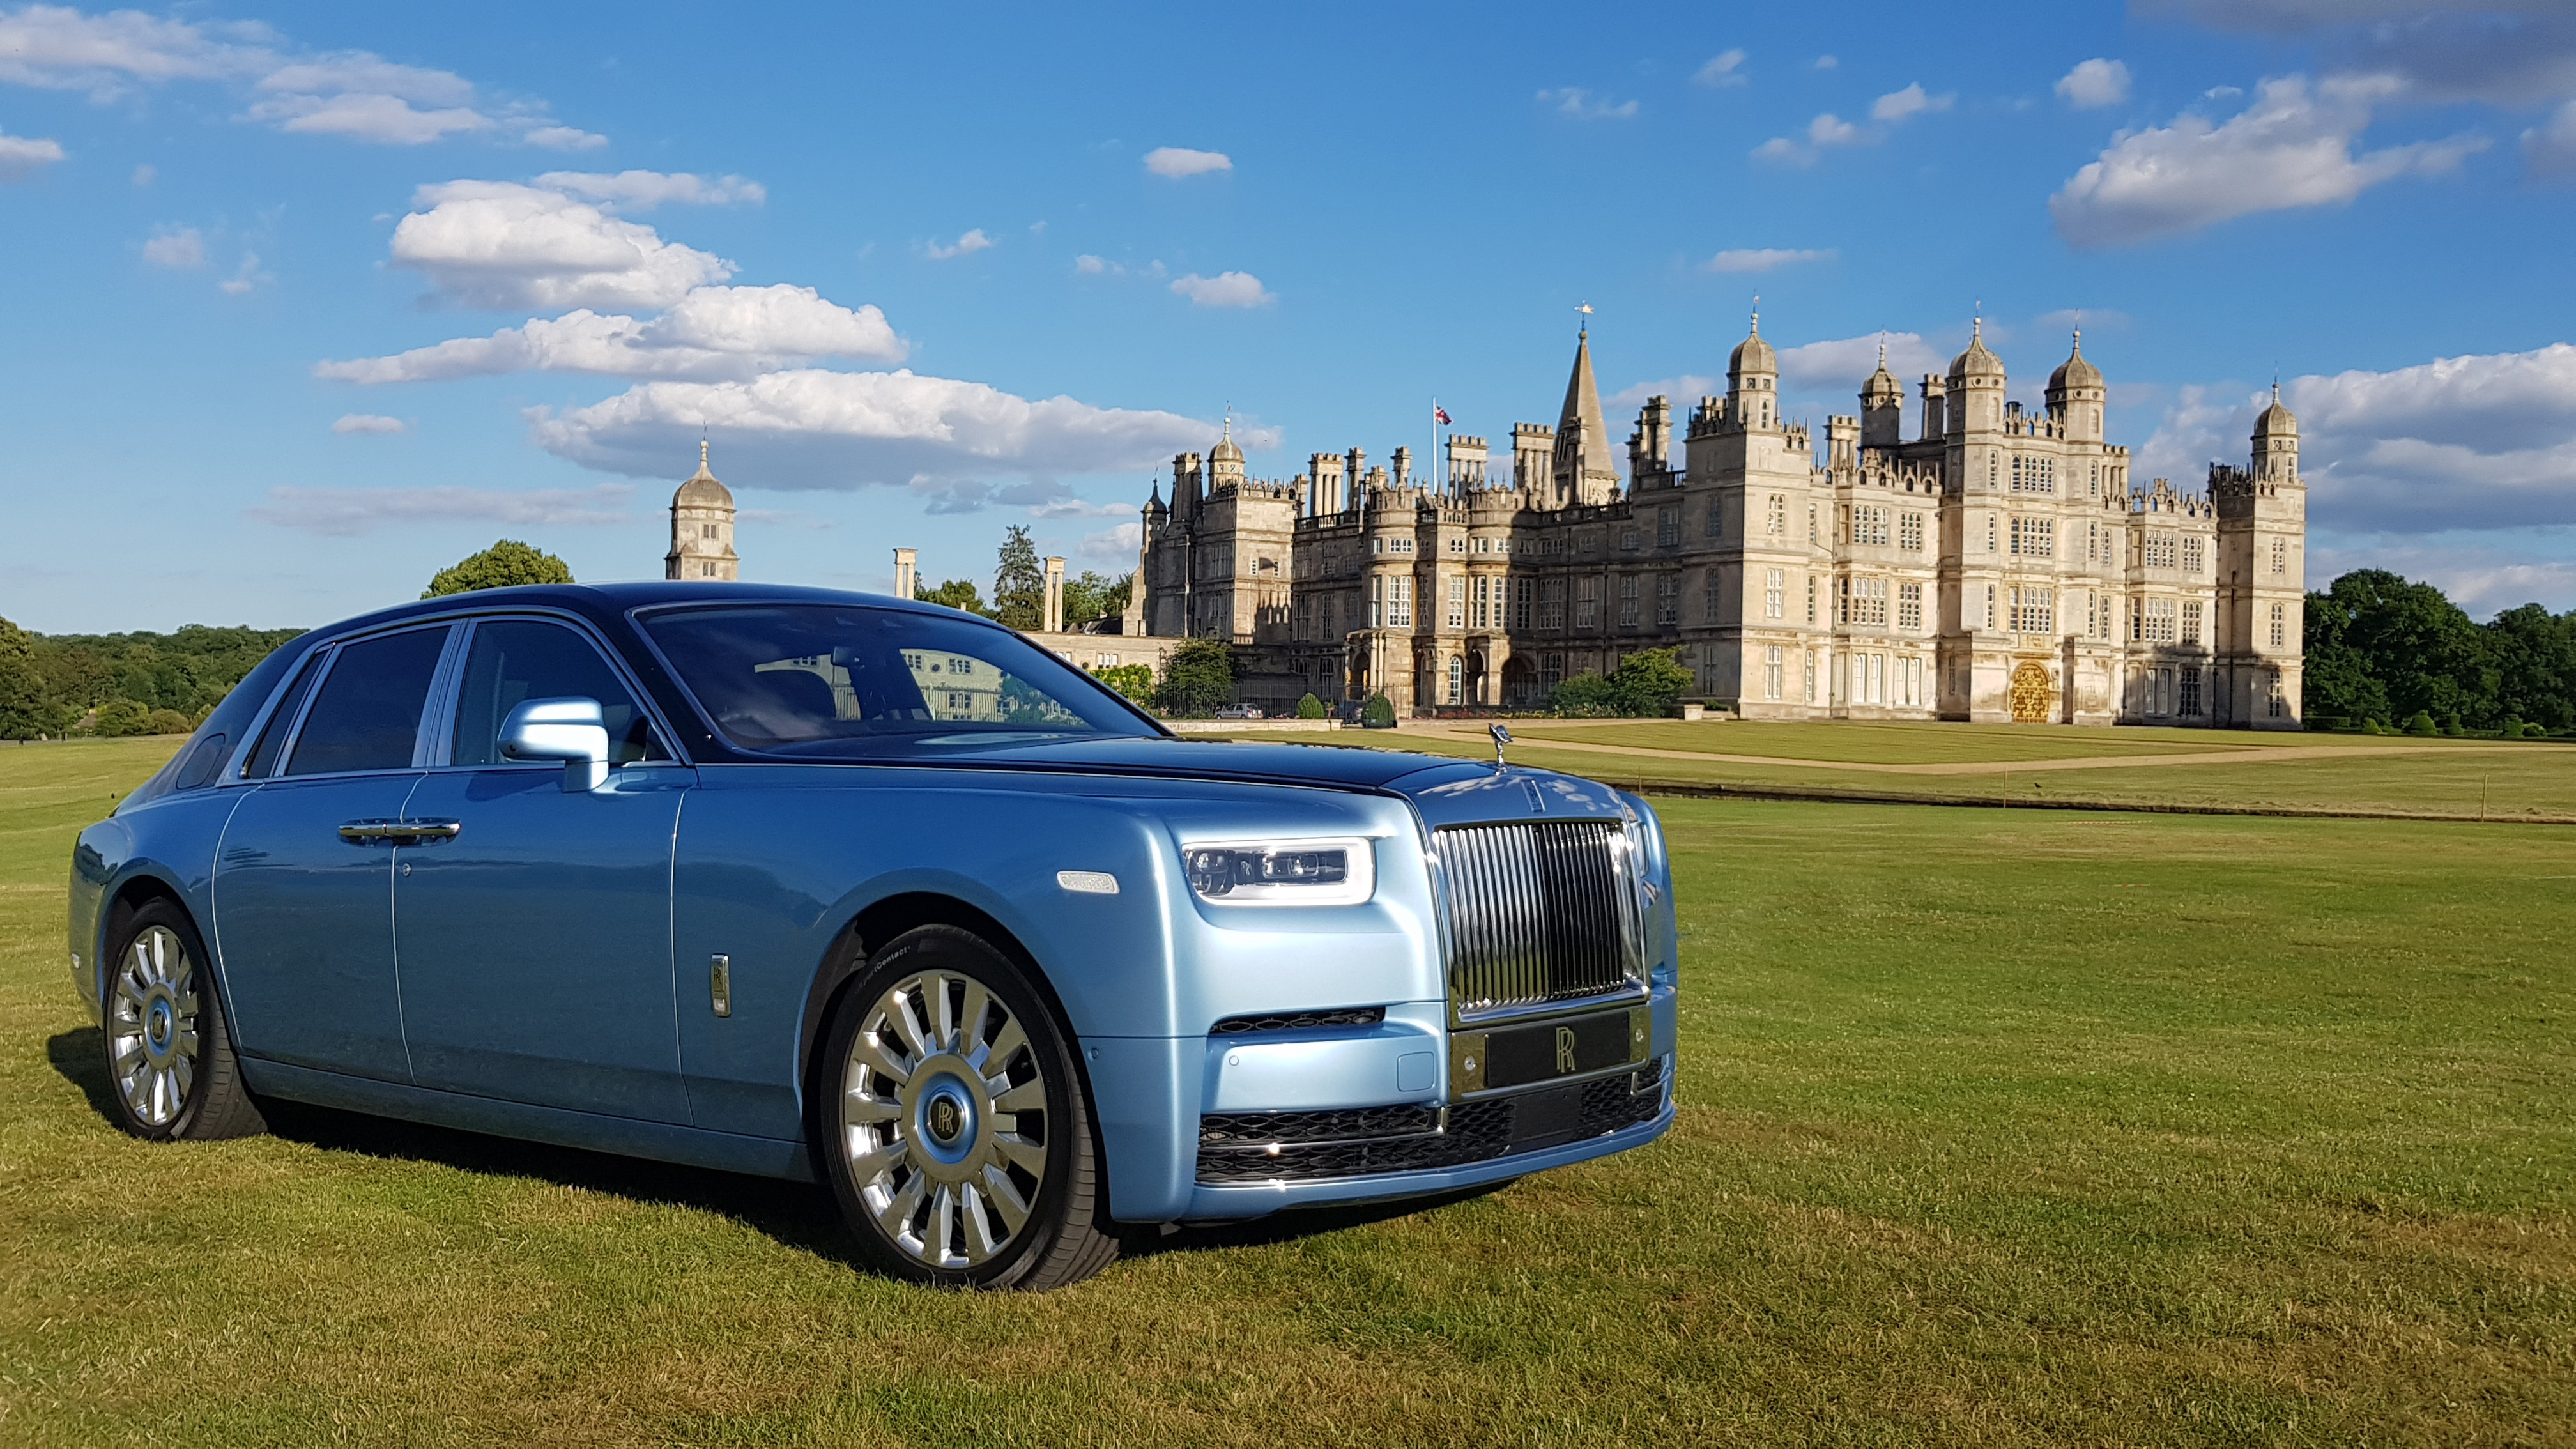 General 4032x2268 car Rolls-Royce luxury cars British cars frontal view headlights sky clouds grass castle trees